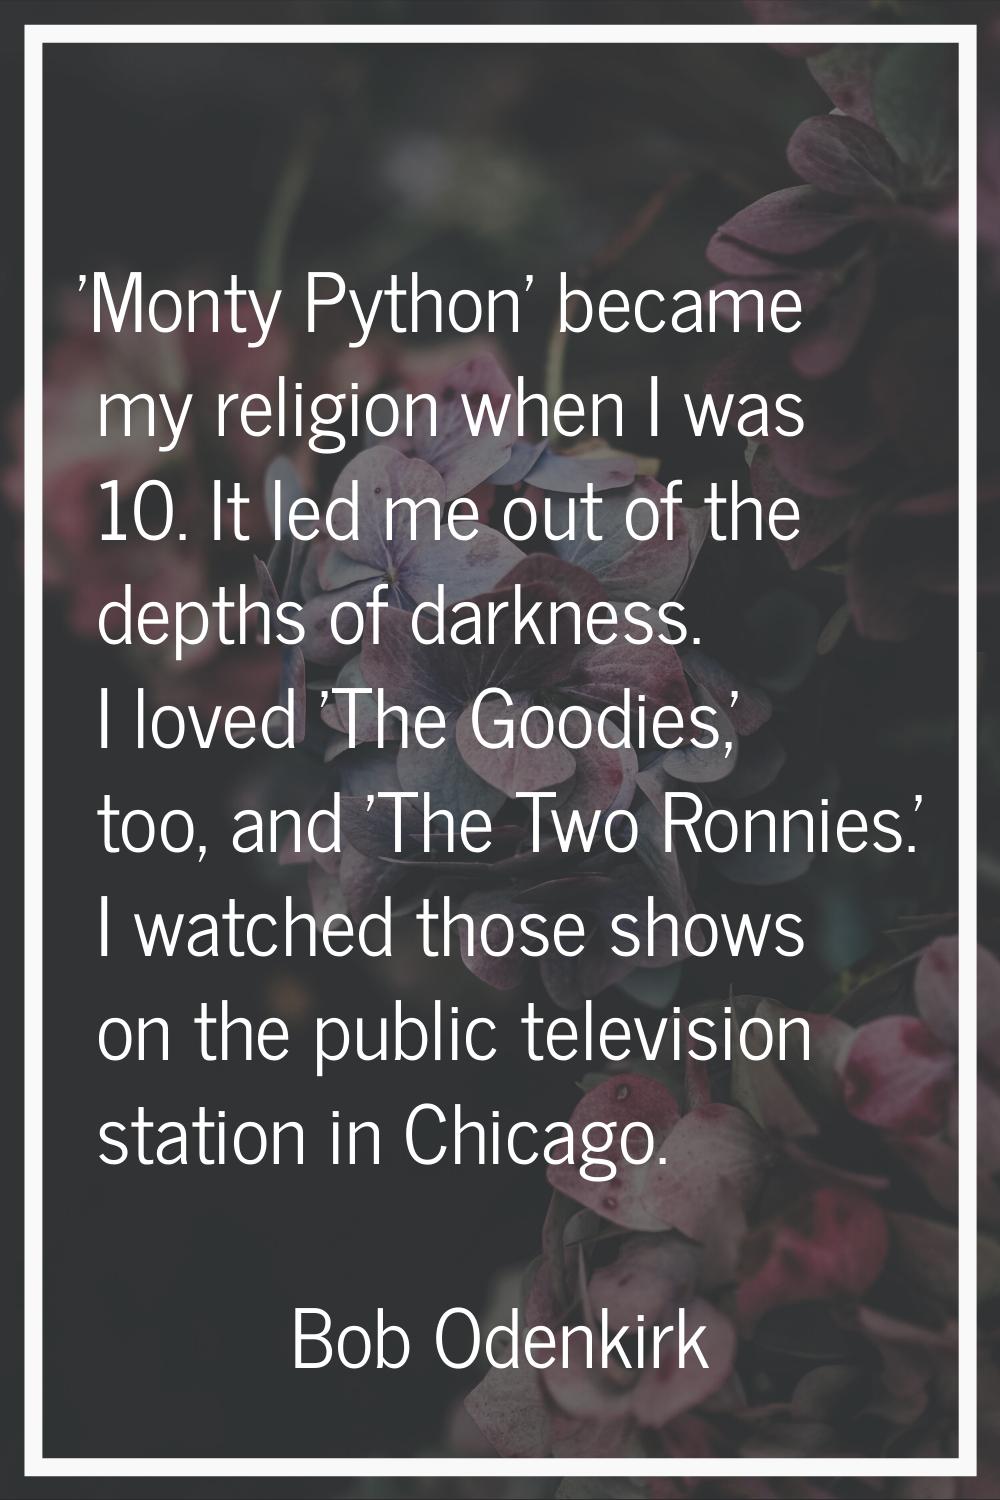 'Monty Python' became my religion when I was 10. It led me out of the depths of darkness. I loved '